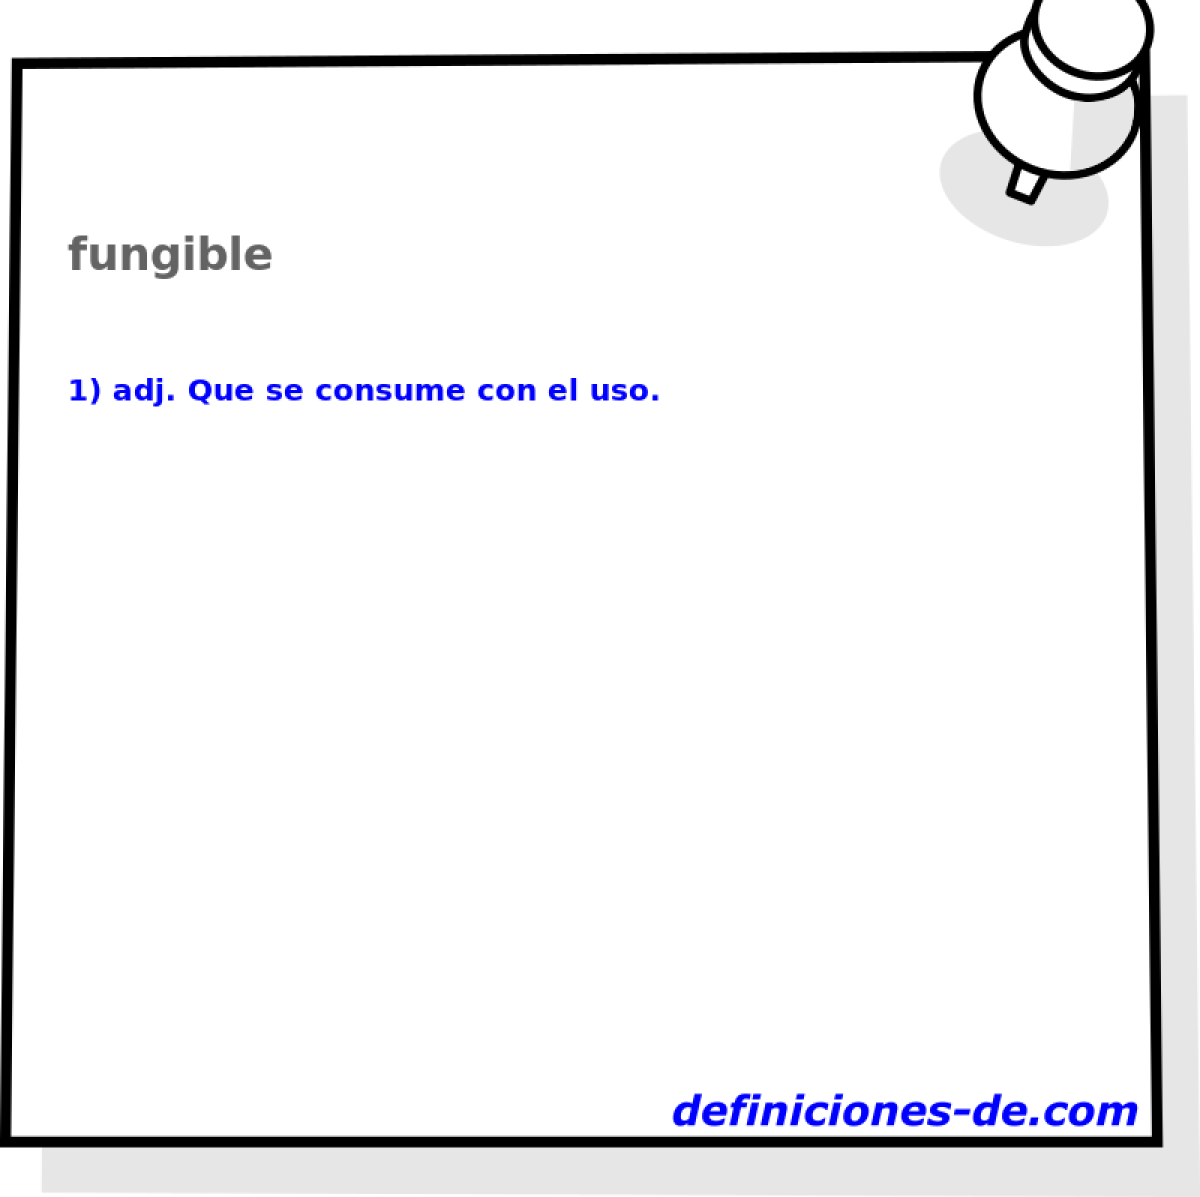 fungible 